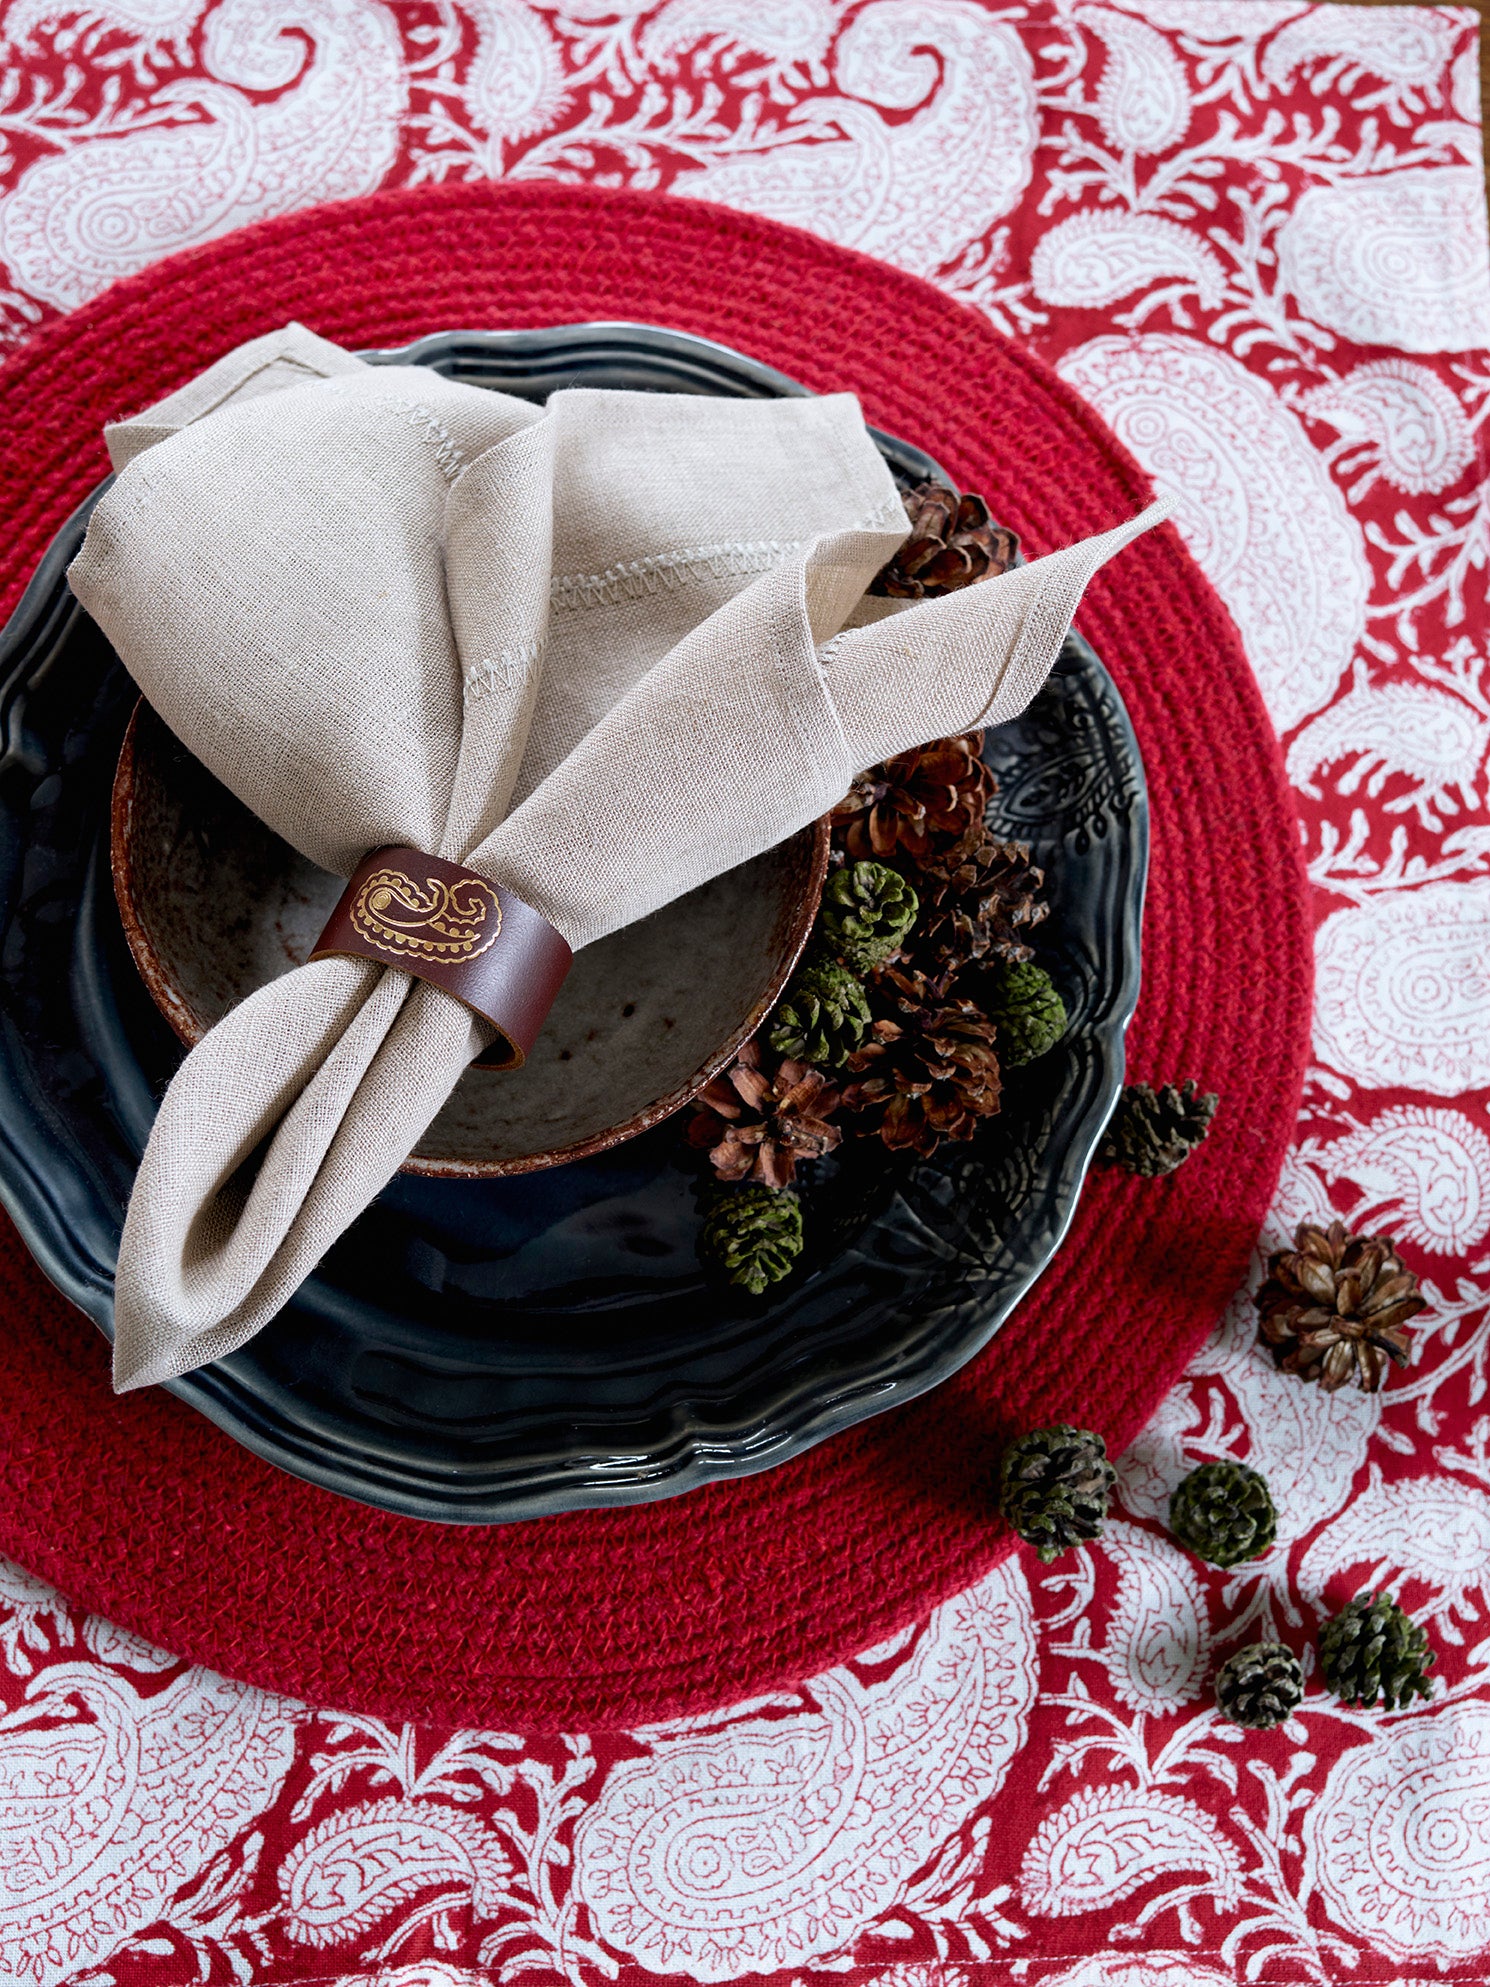 Tablecloth with Big Paisley® print in Red